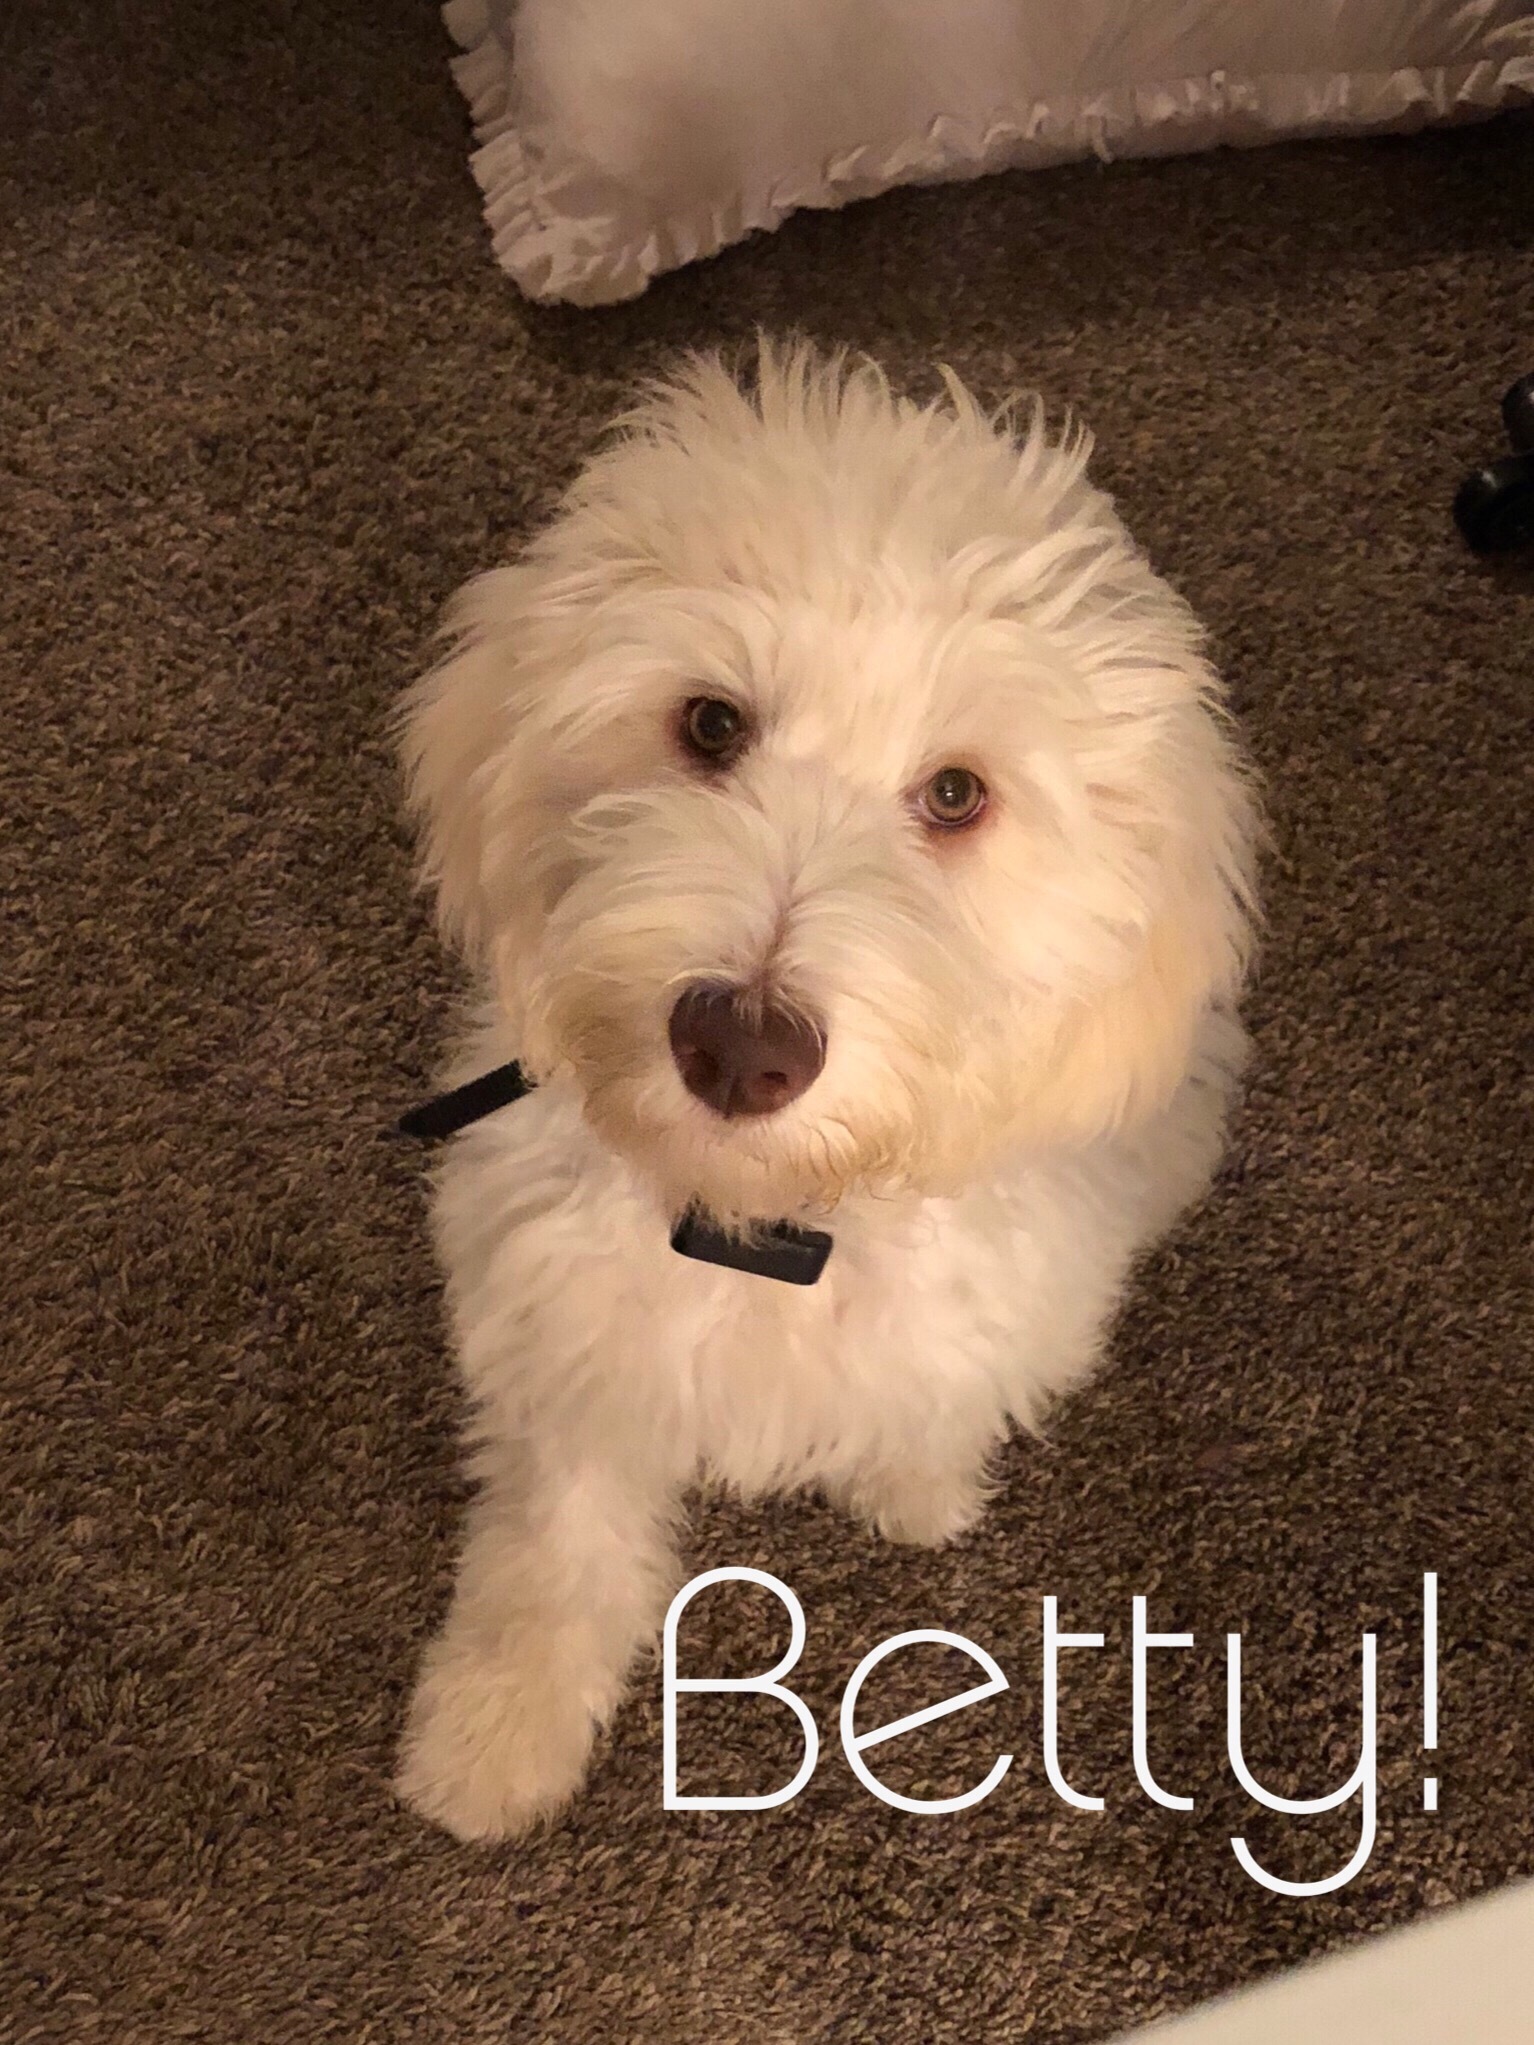 Betty Tx detail page